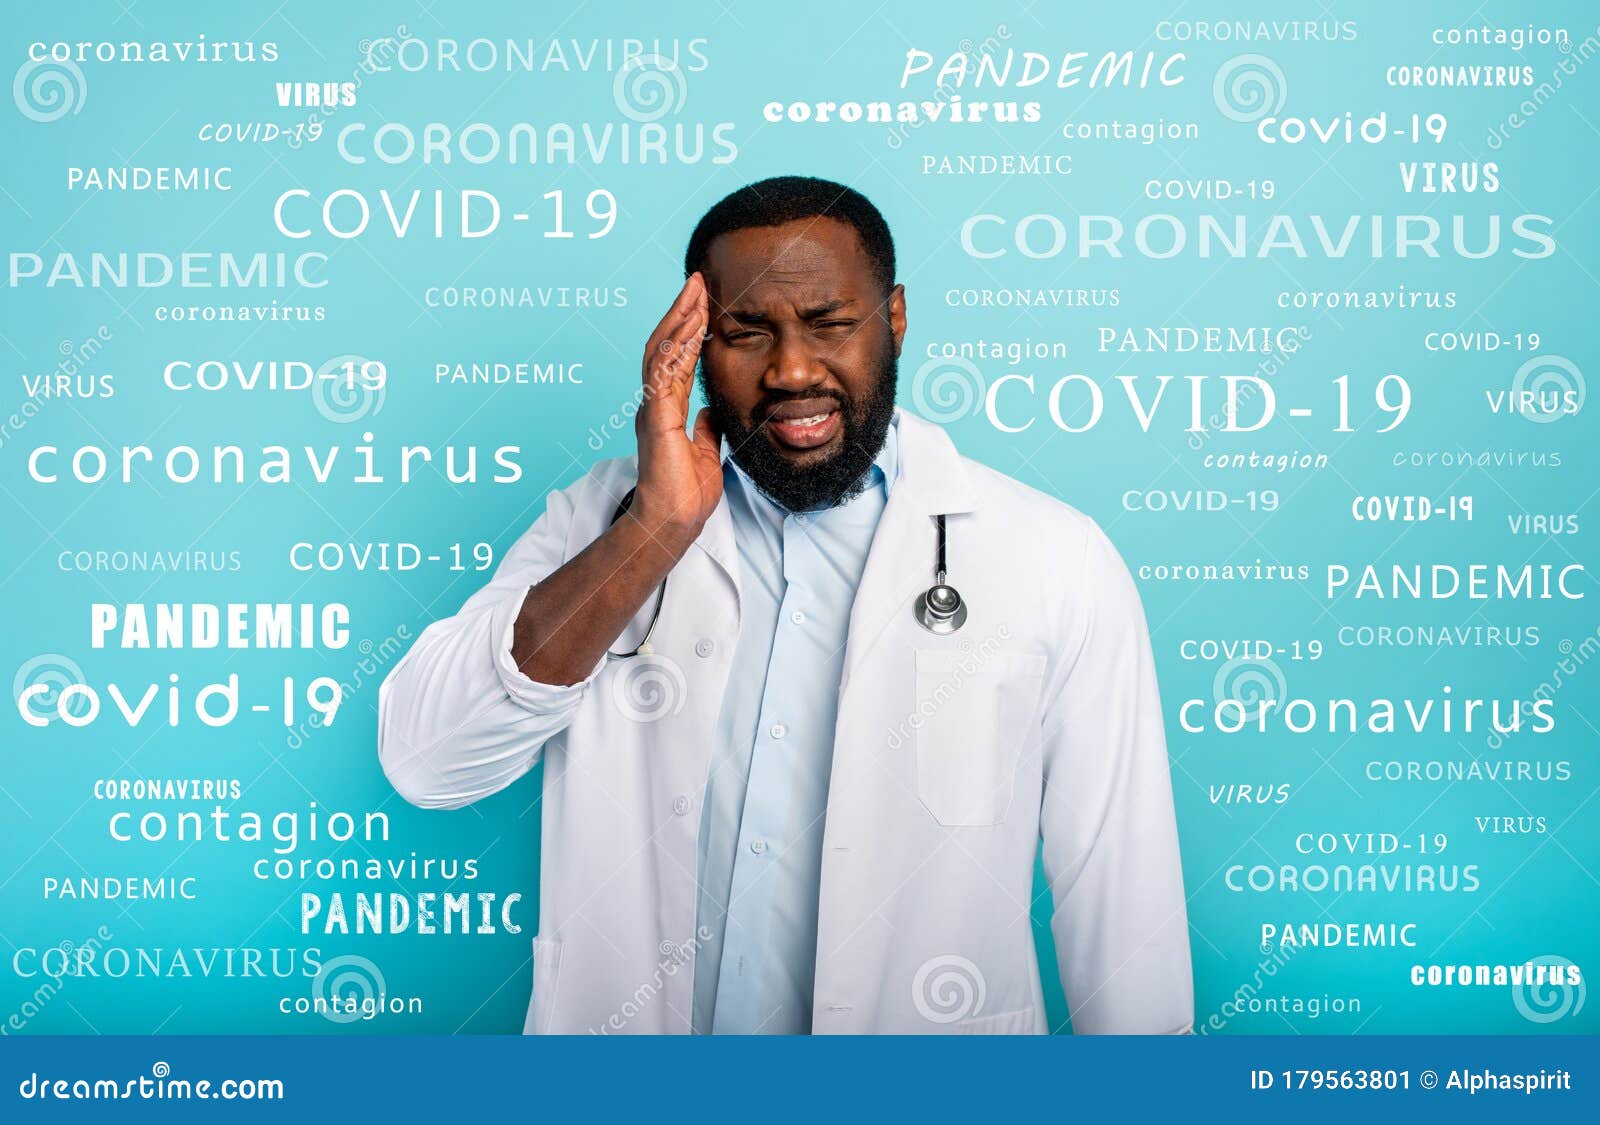 doctor is exhausted due to overwork by coronavirus covid-19. cyan background